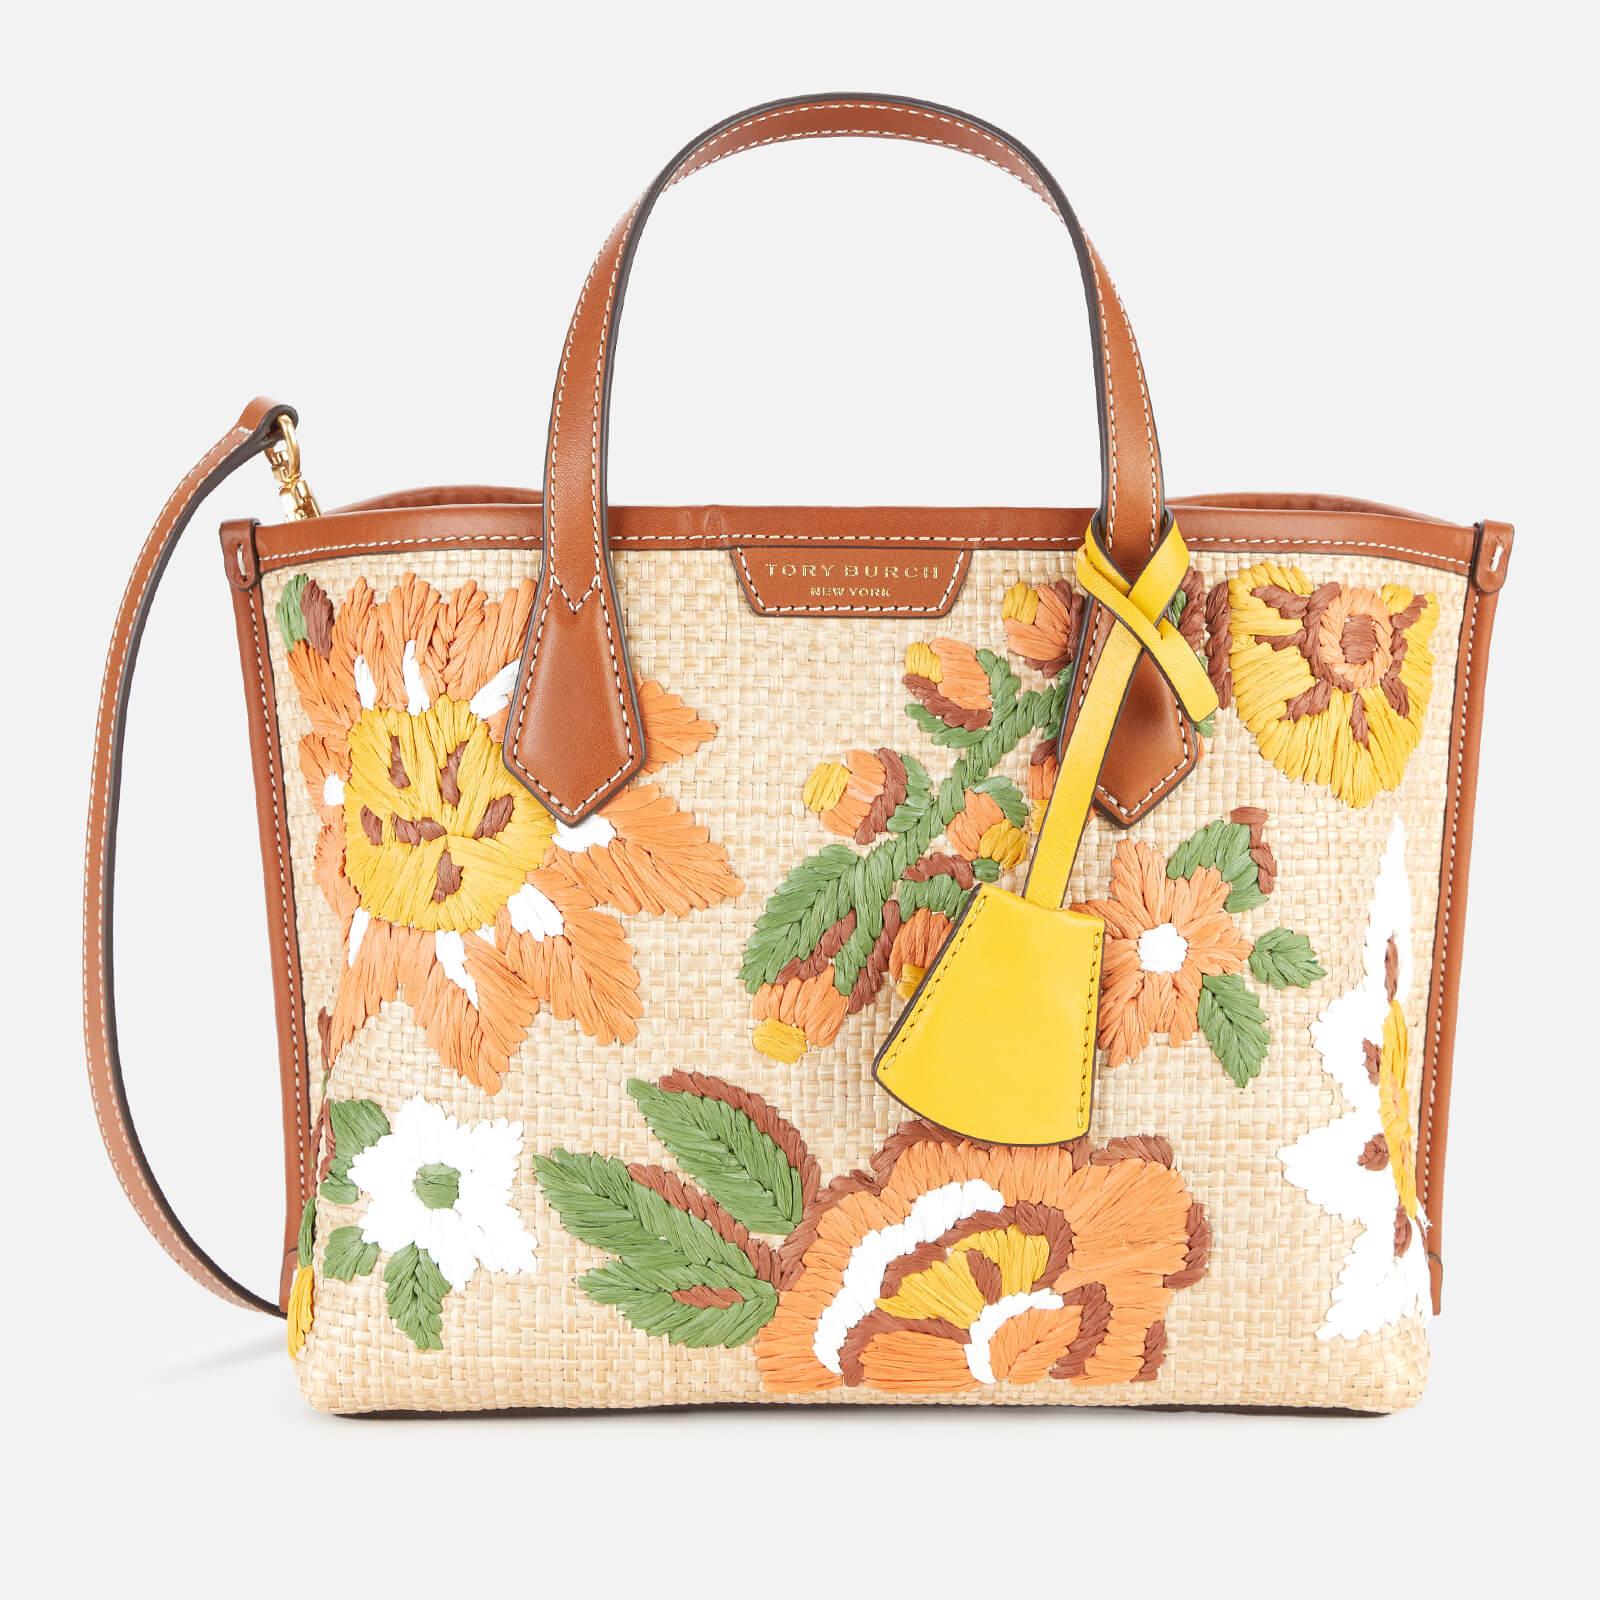 Tory Burch Perry Straw Embroidered Tote Bag in Brown